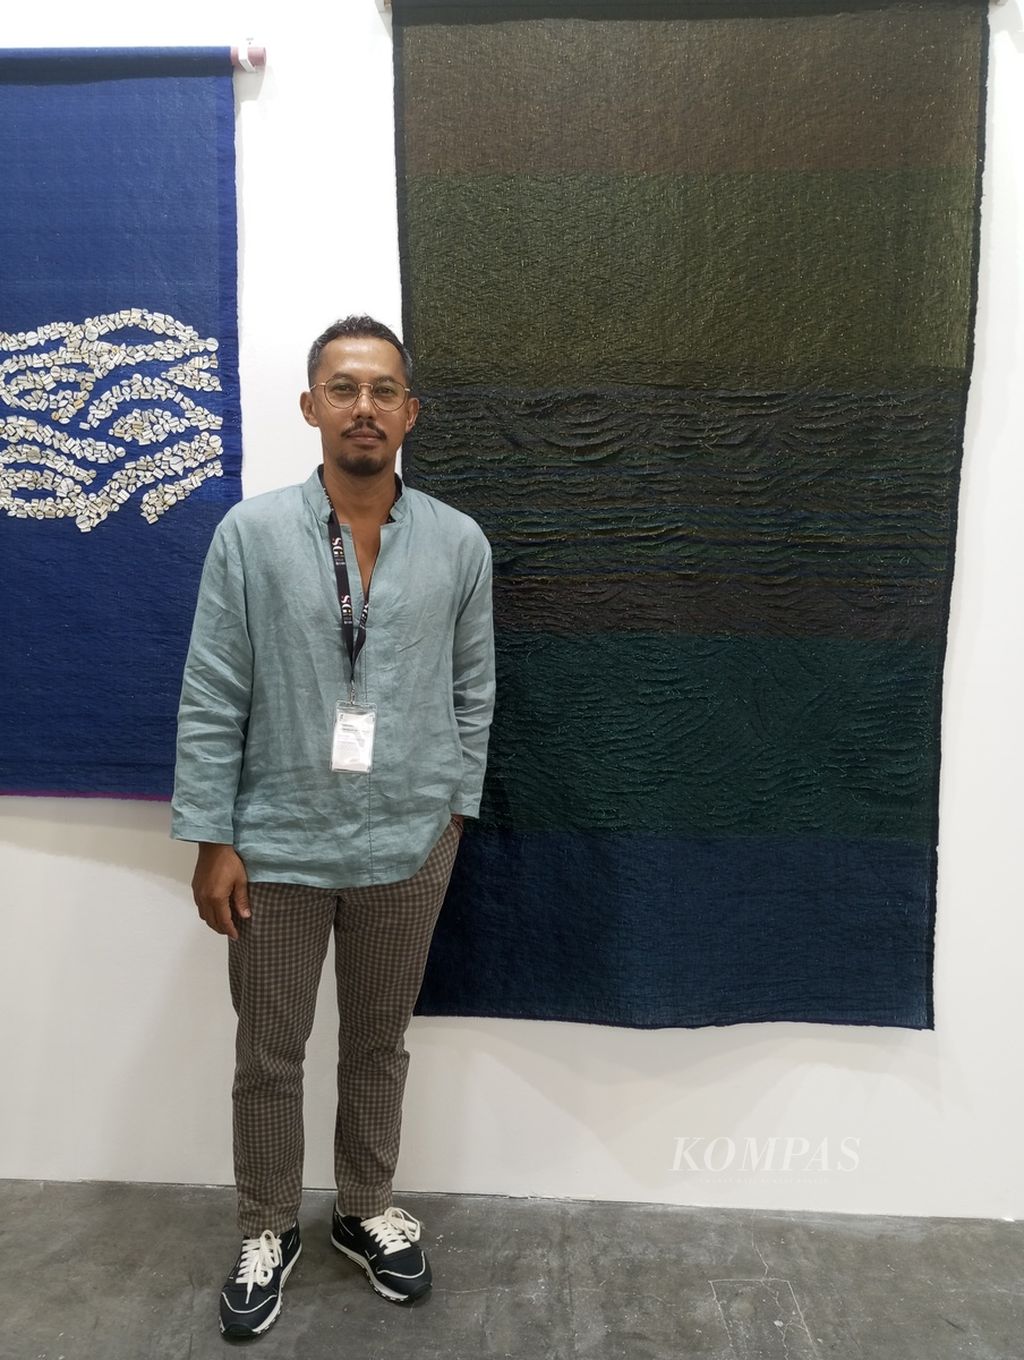 Ari Bayuaji (49), an Indonesian artist, exhibited his works at Art SG 2024 held at Marina Bay Sands Expo & Convention Centre in Singapore on Thursday (18/1/2024).